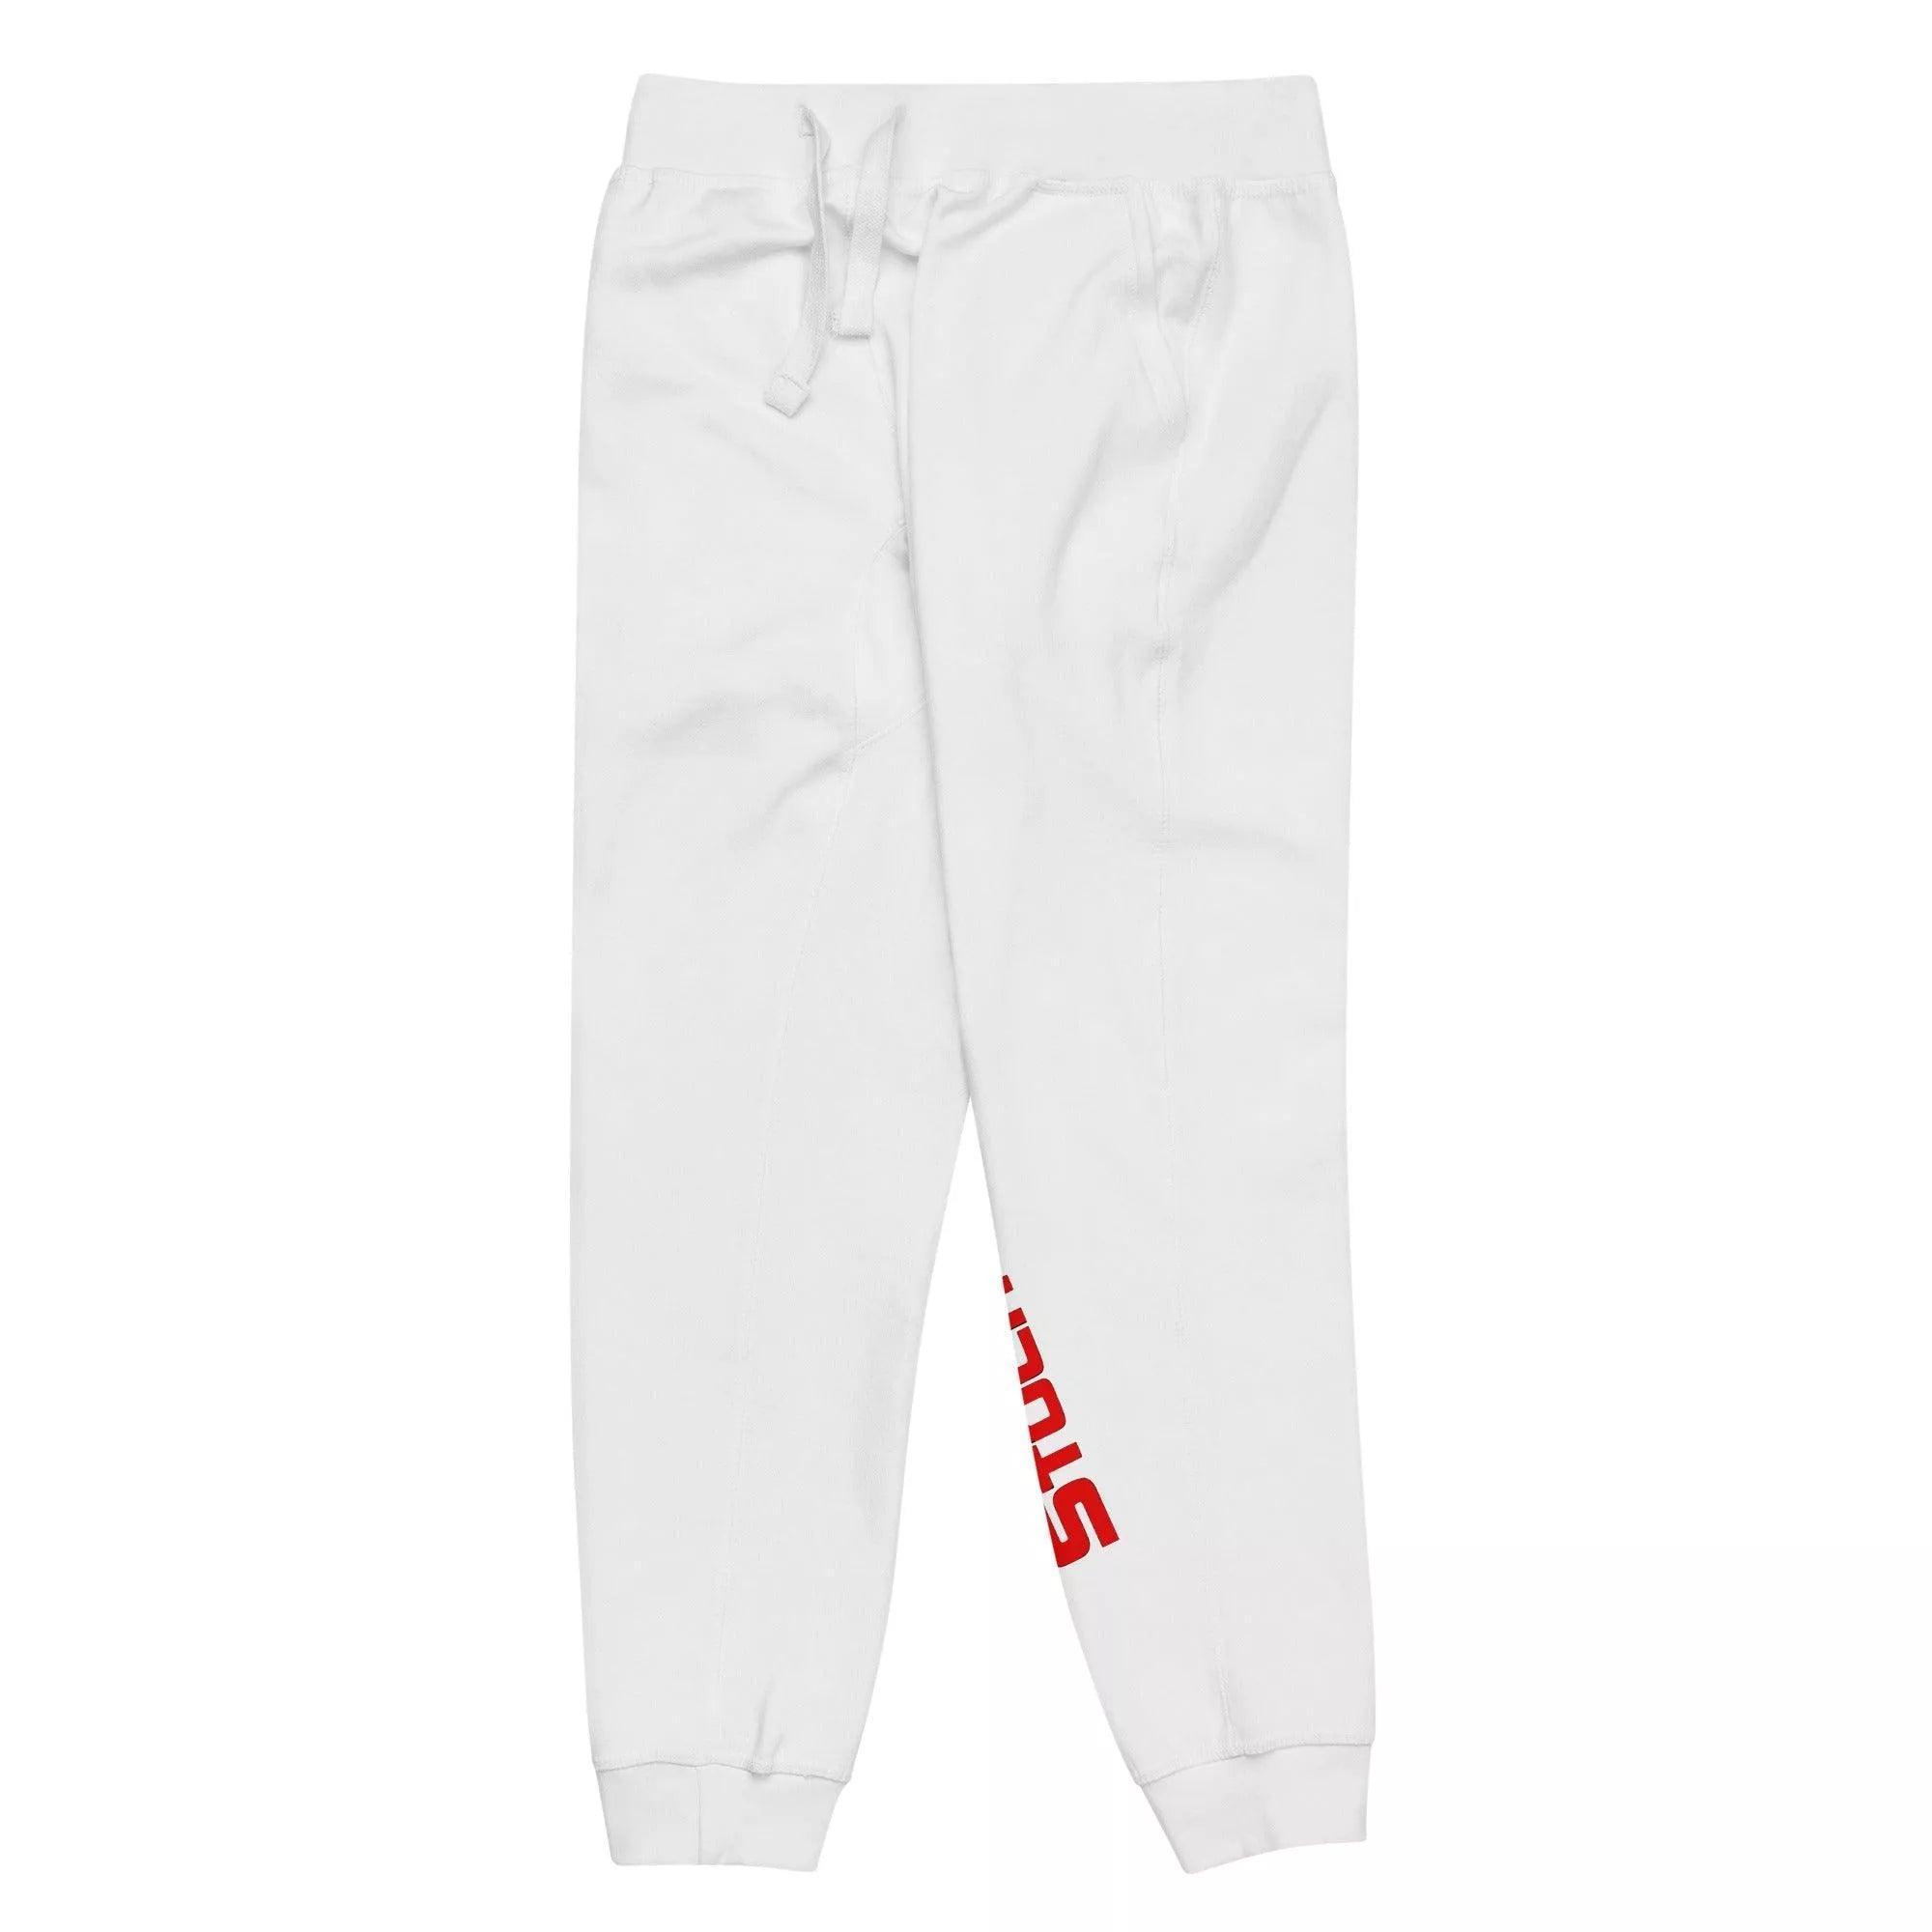 Mostly Stock Sweatpants - InvestmenTees